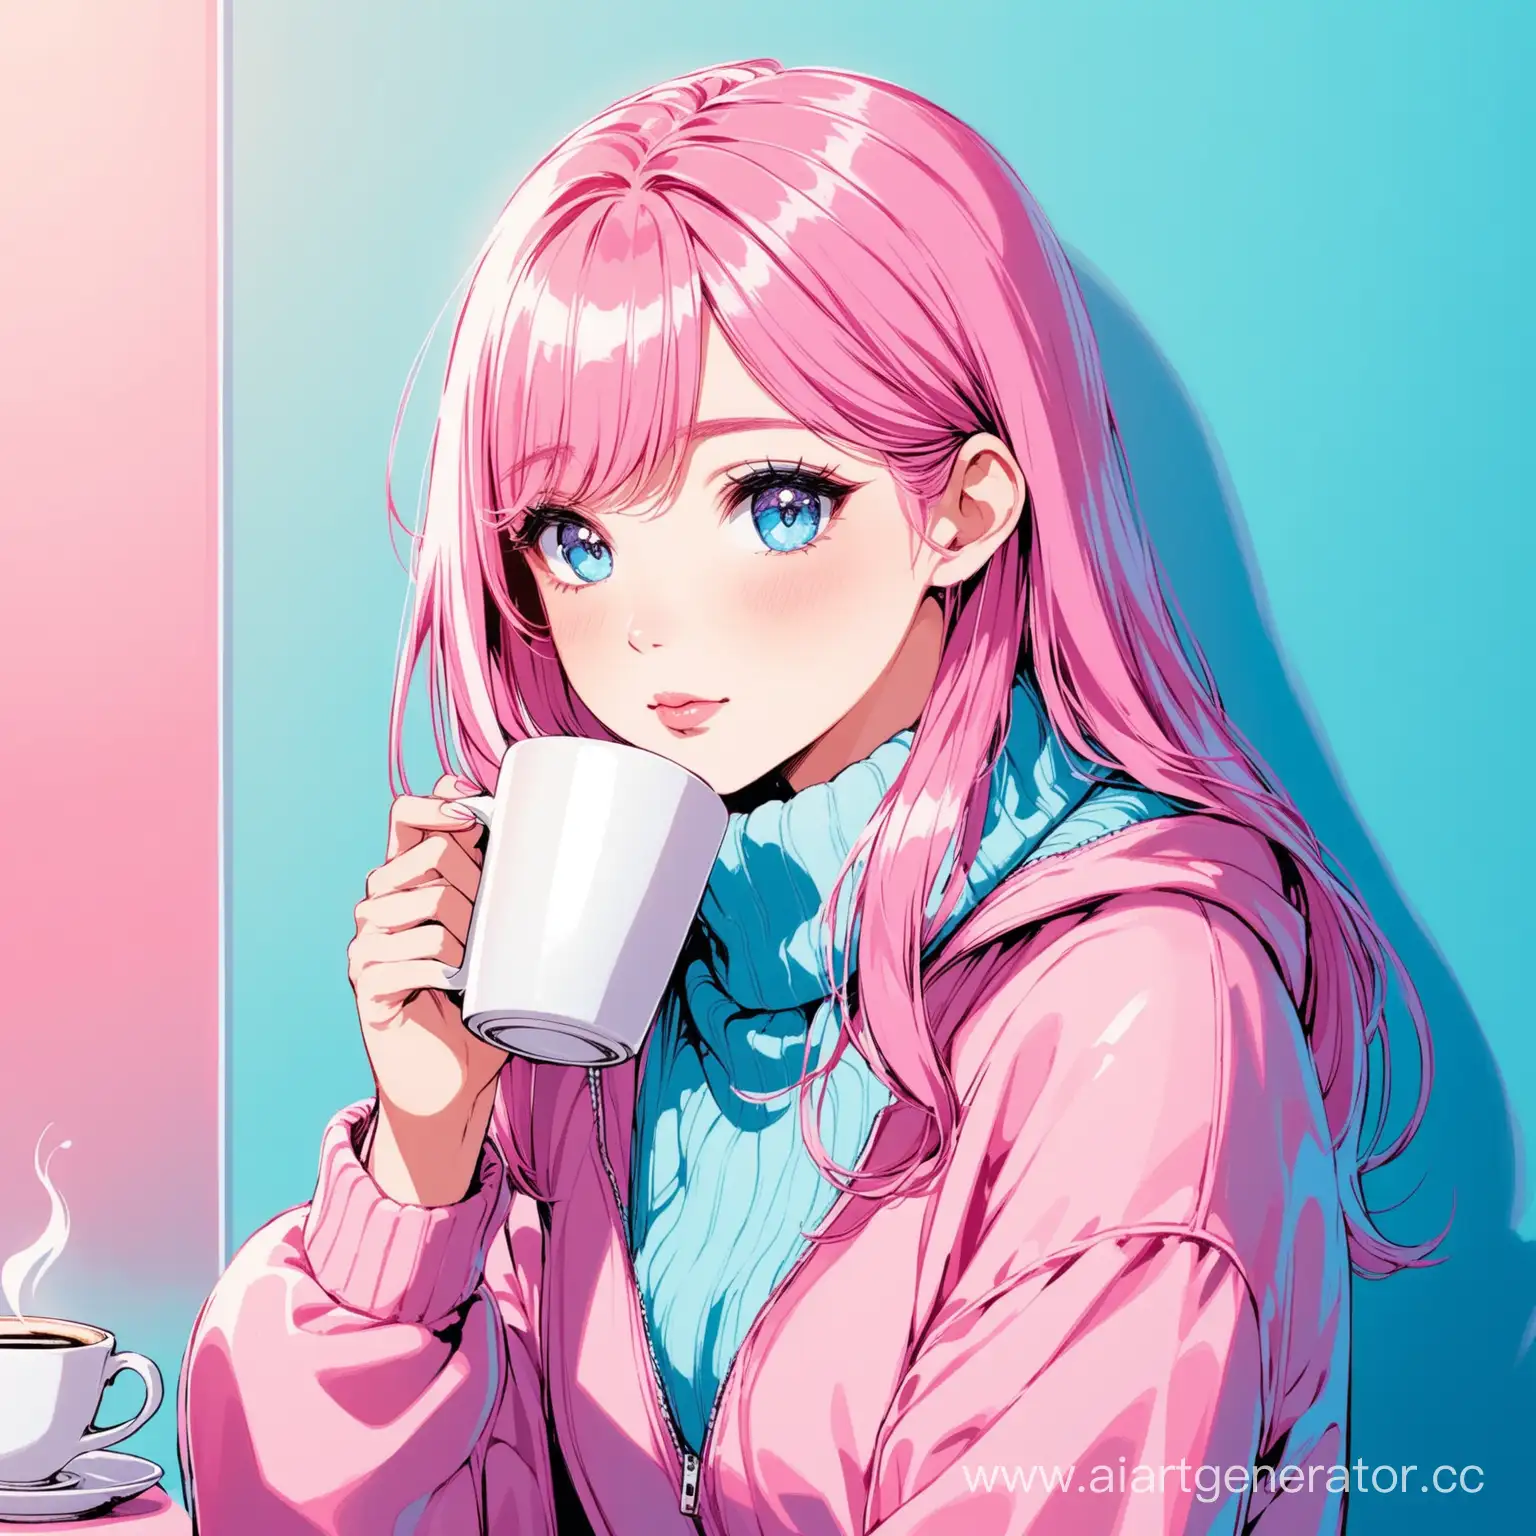 Young-Woman-Enjoying-Coffee-in-Pink-and-Blue-Ambiance